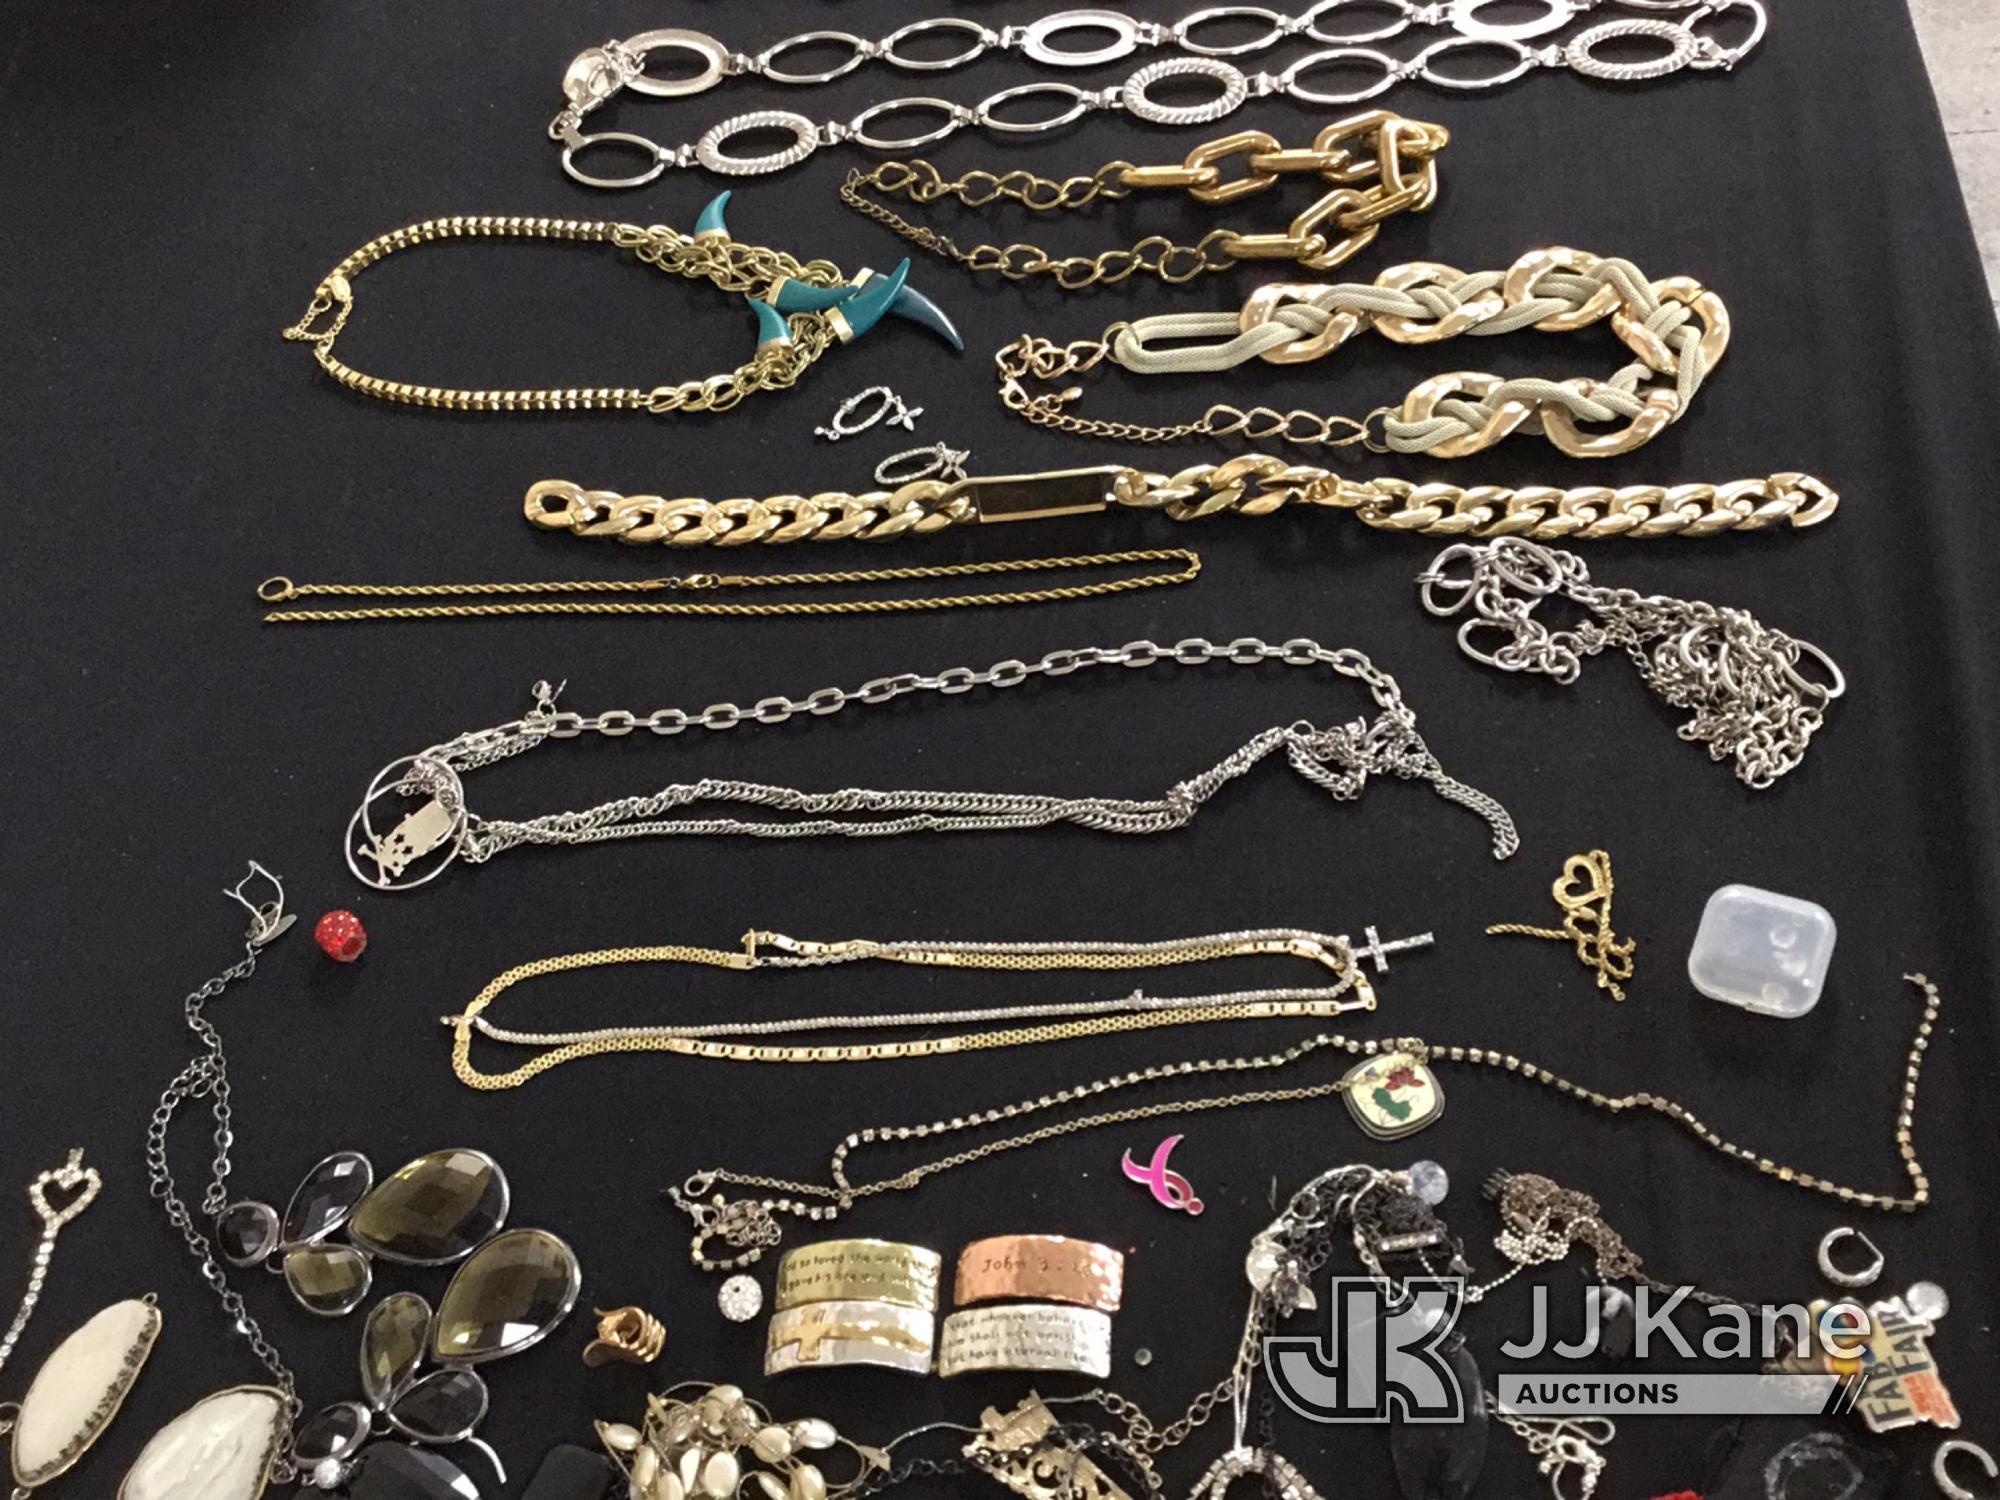 (Jurupa Valley, CA) Necklaces | possibly costume jewelry | authenticity unknown (Used) NOTE: This un